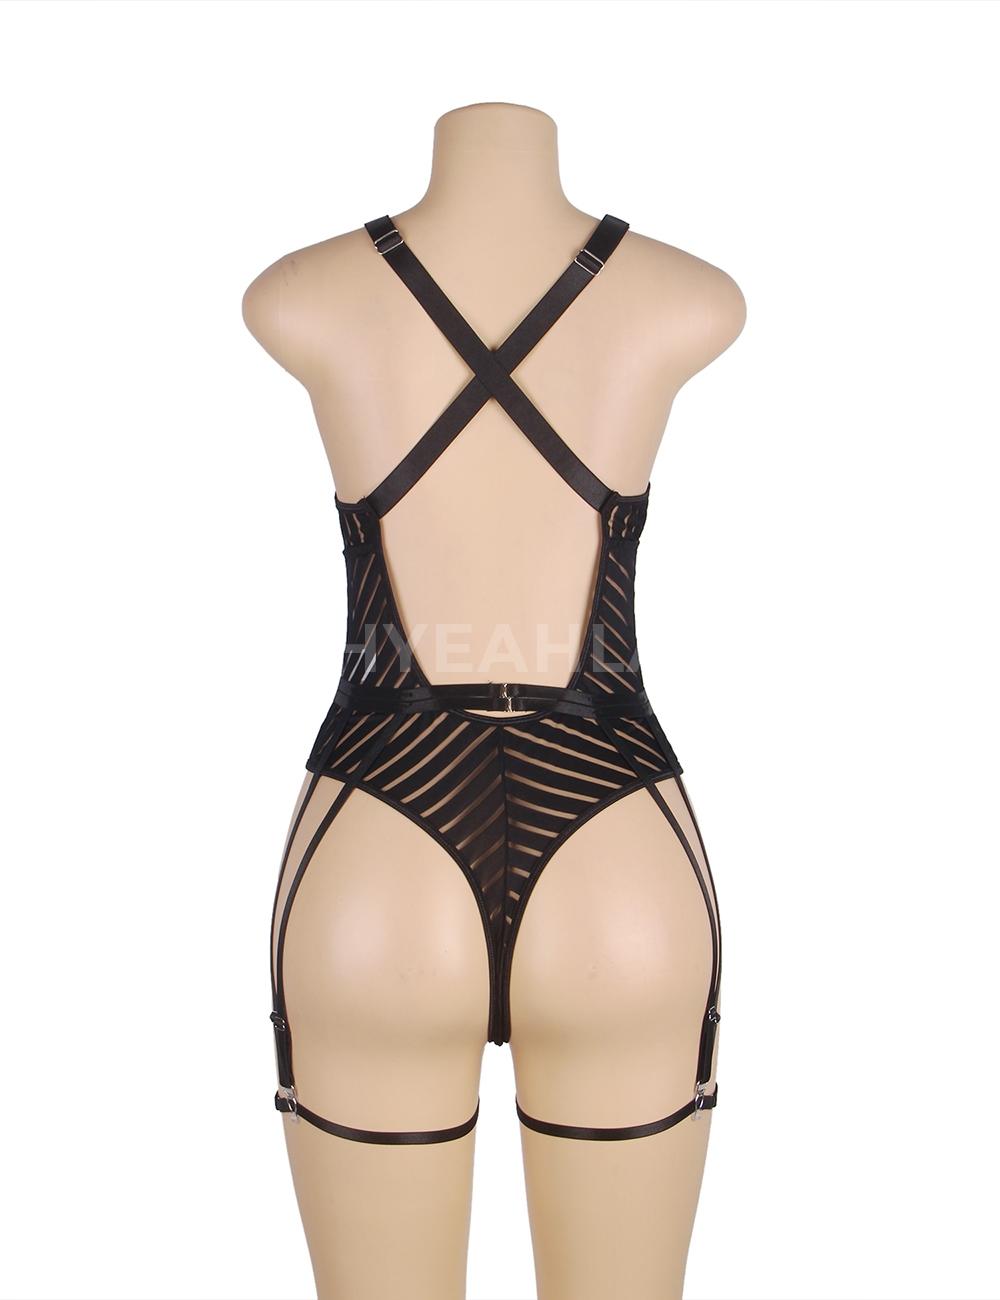 Striped Bodysuit with Strappy Back rear view